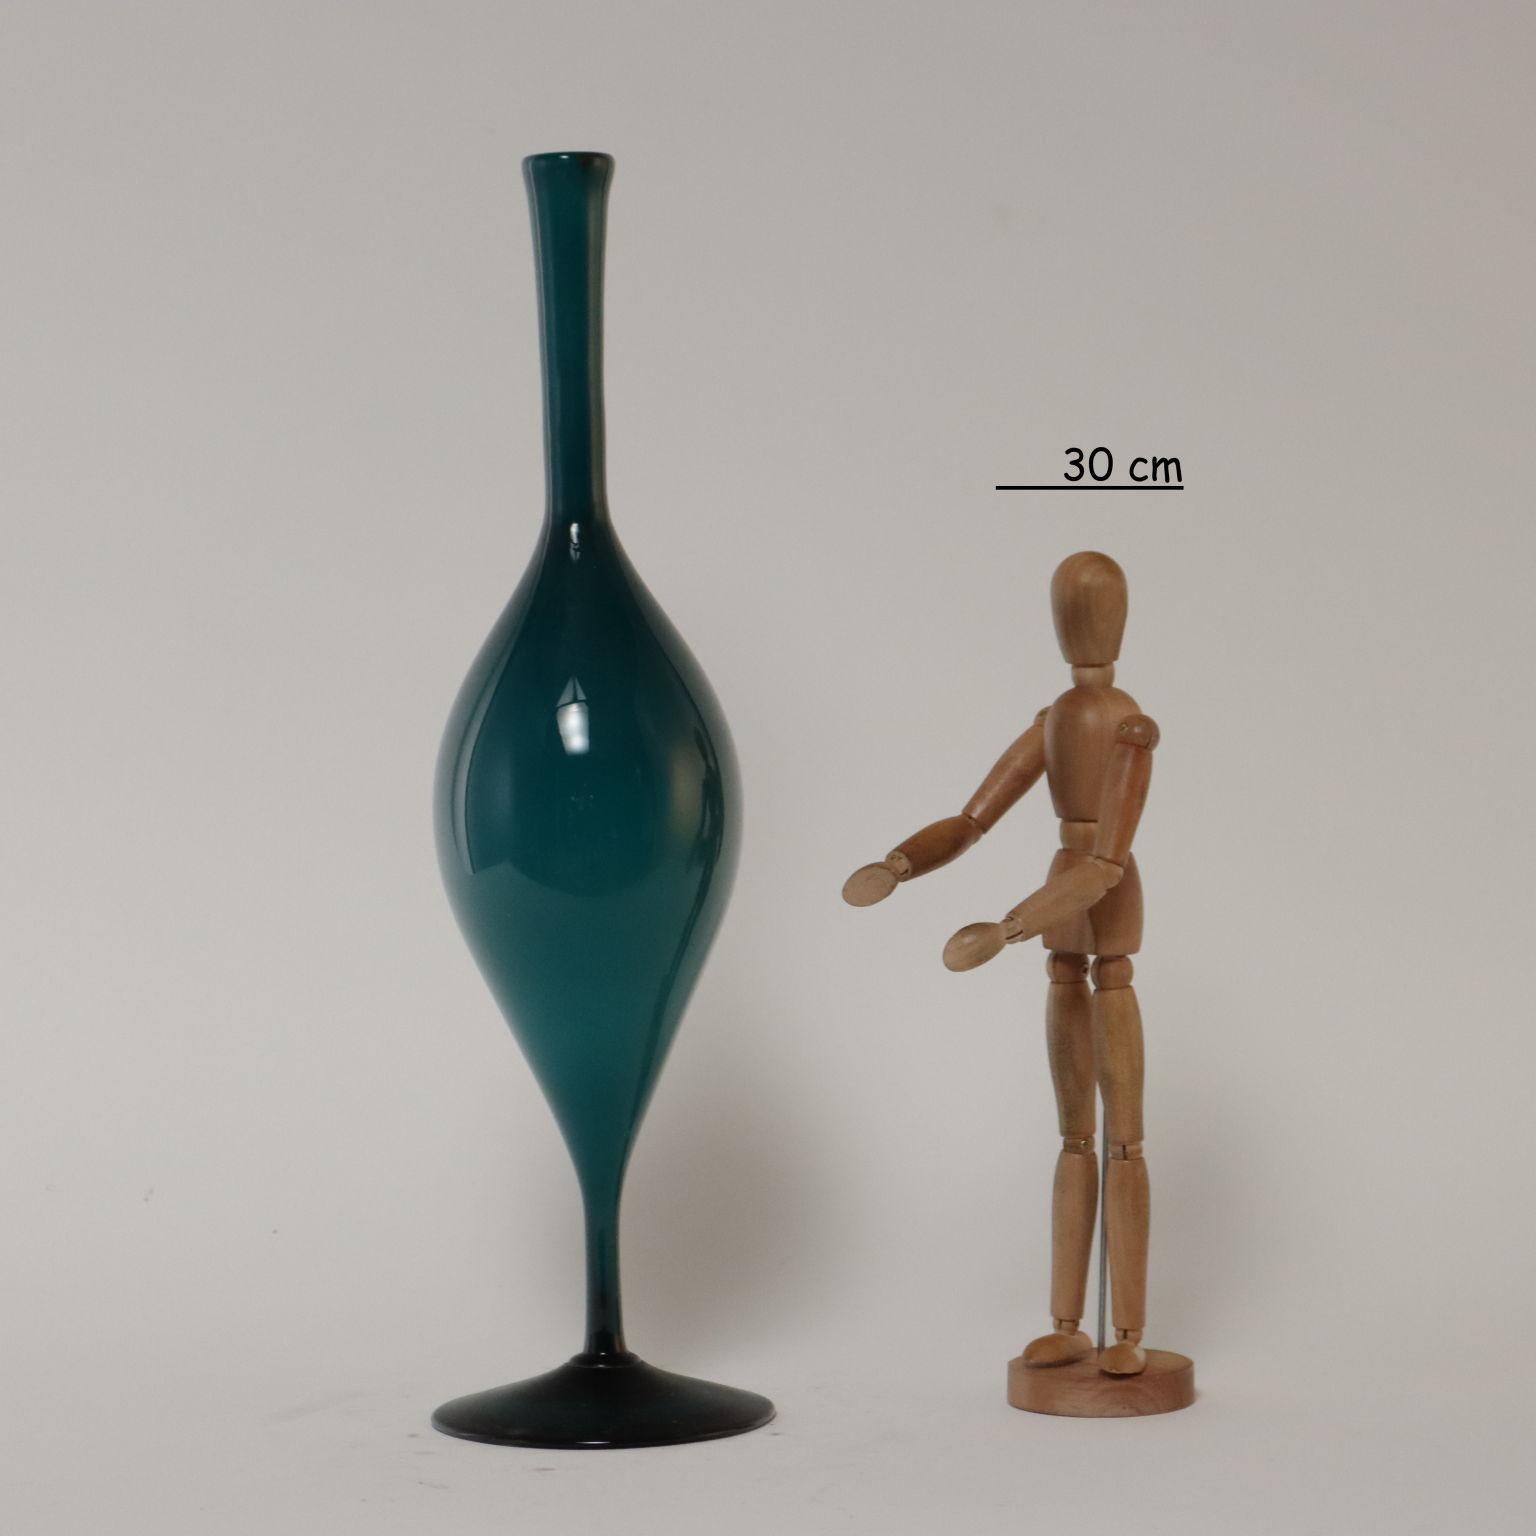 Green-colored encased glass vase with circular base and long narrow neck.